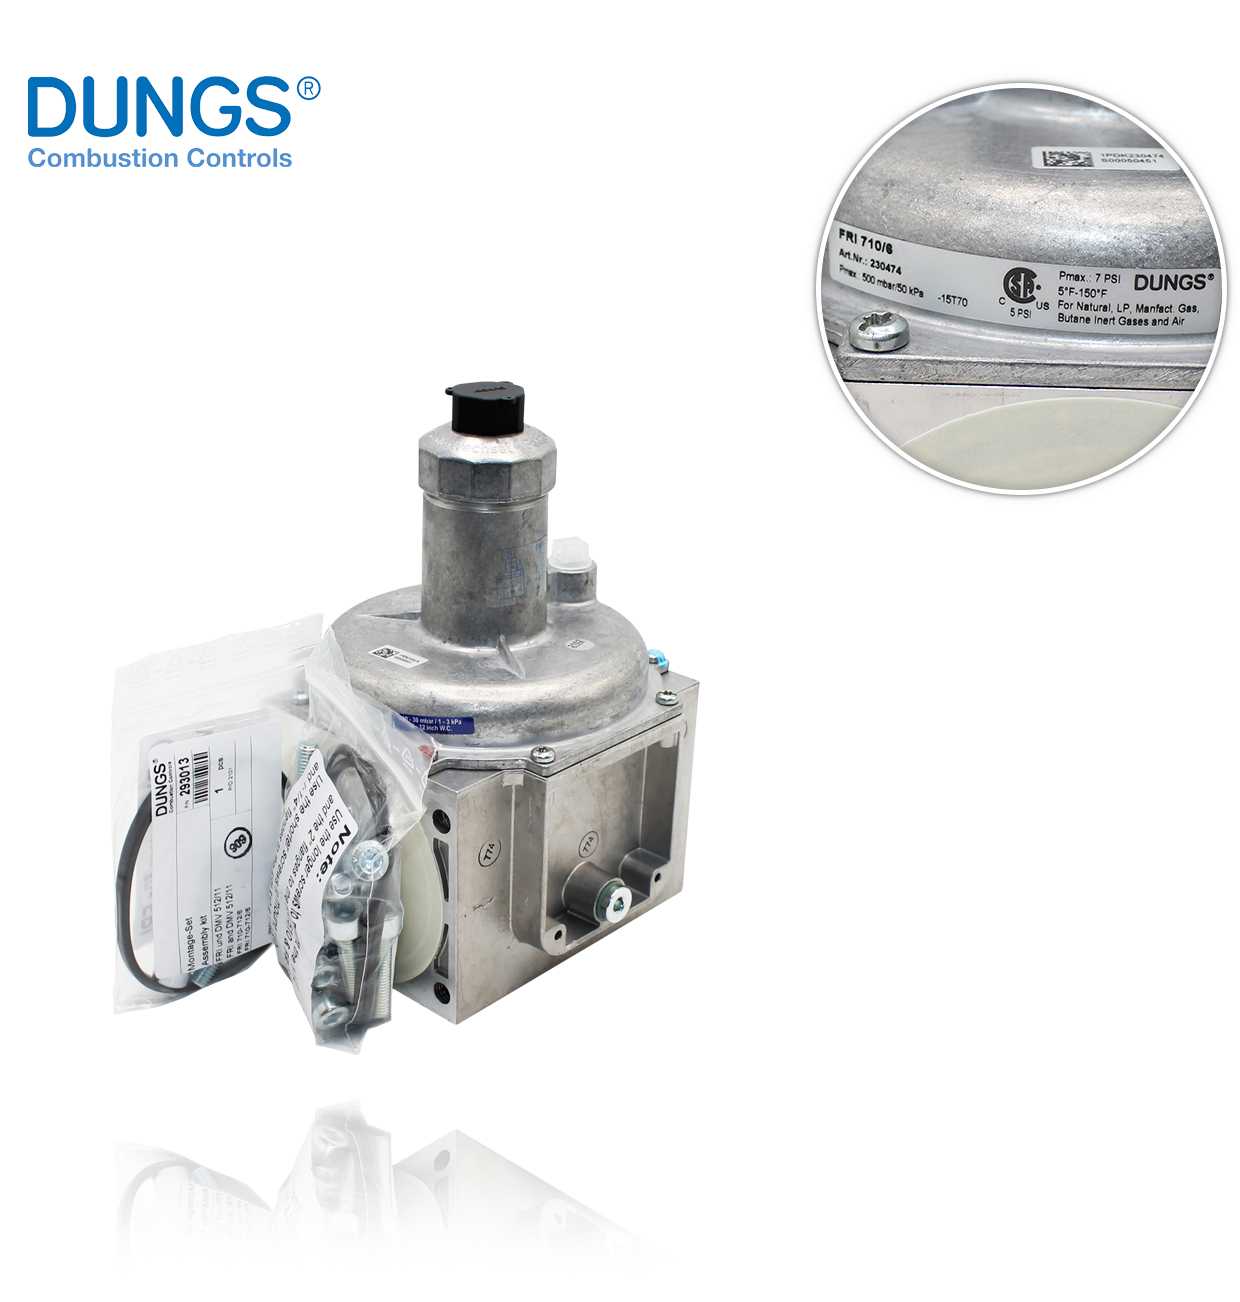 DUNGS 230474 FRI 710/6 PS 4-12" WC REGULATOR WITH FILTER